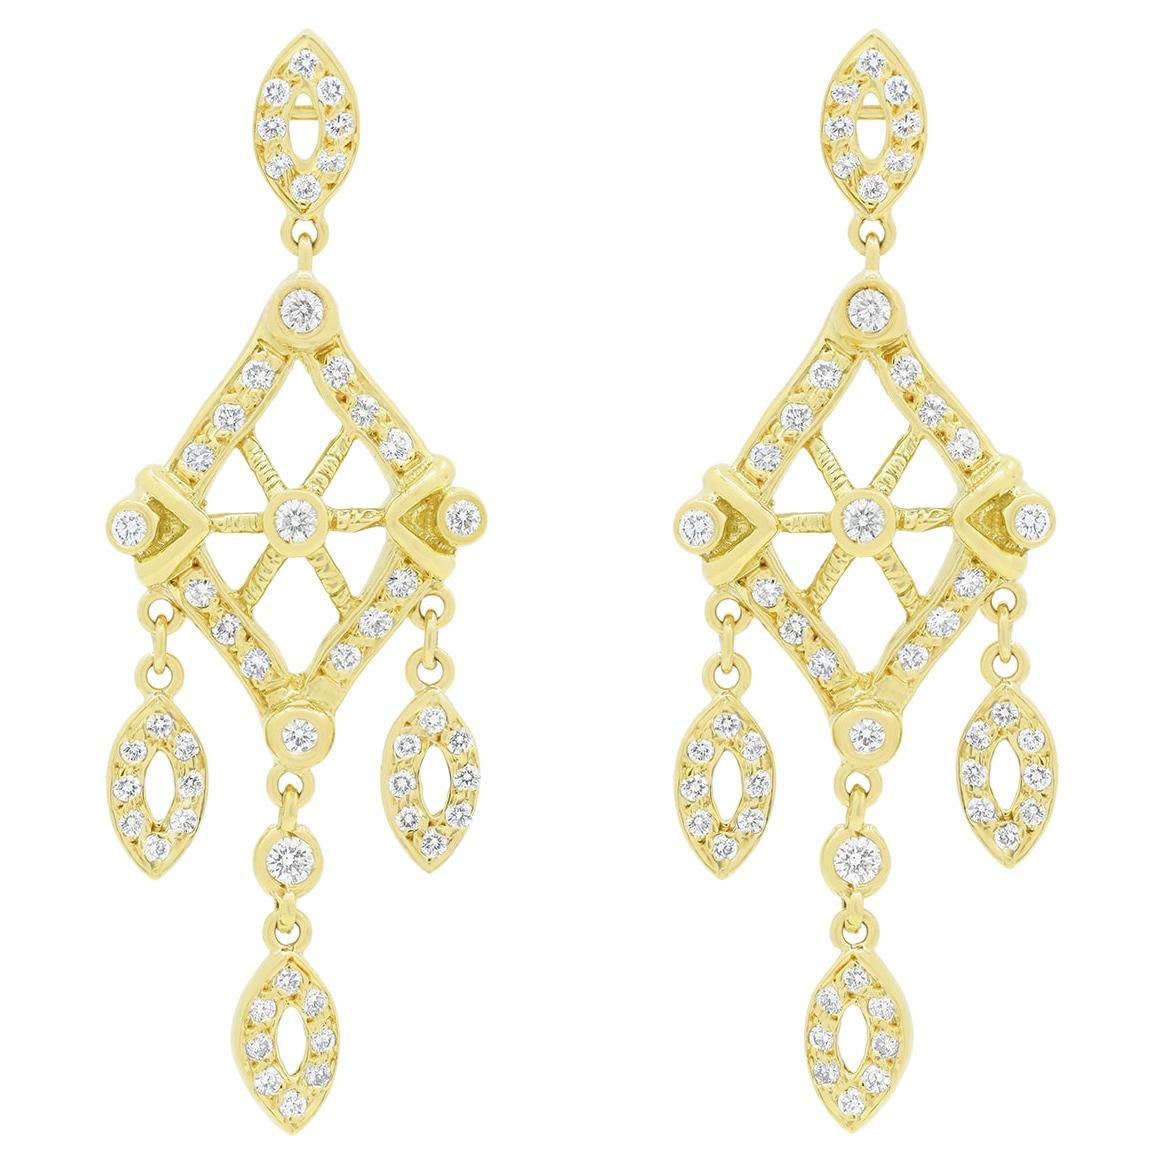 Diana M. 18kt yellow gold earrings diamond shape with 2.00cts total  For Sale